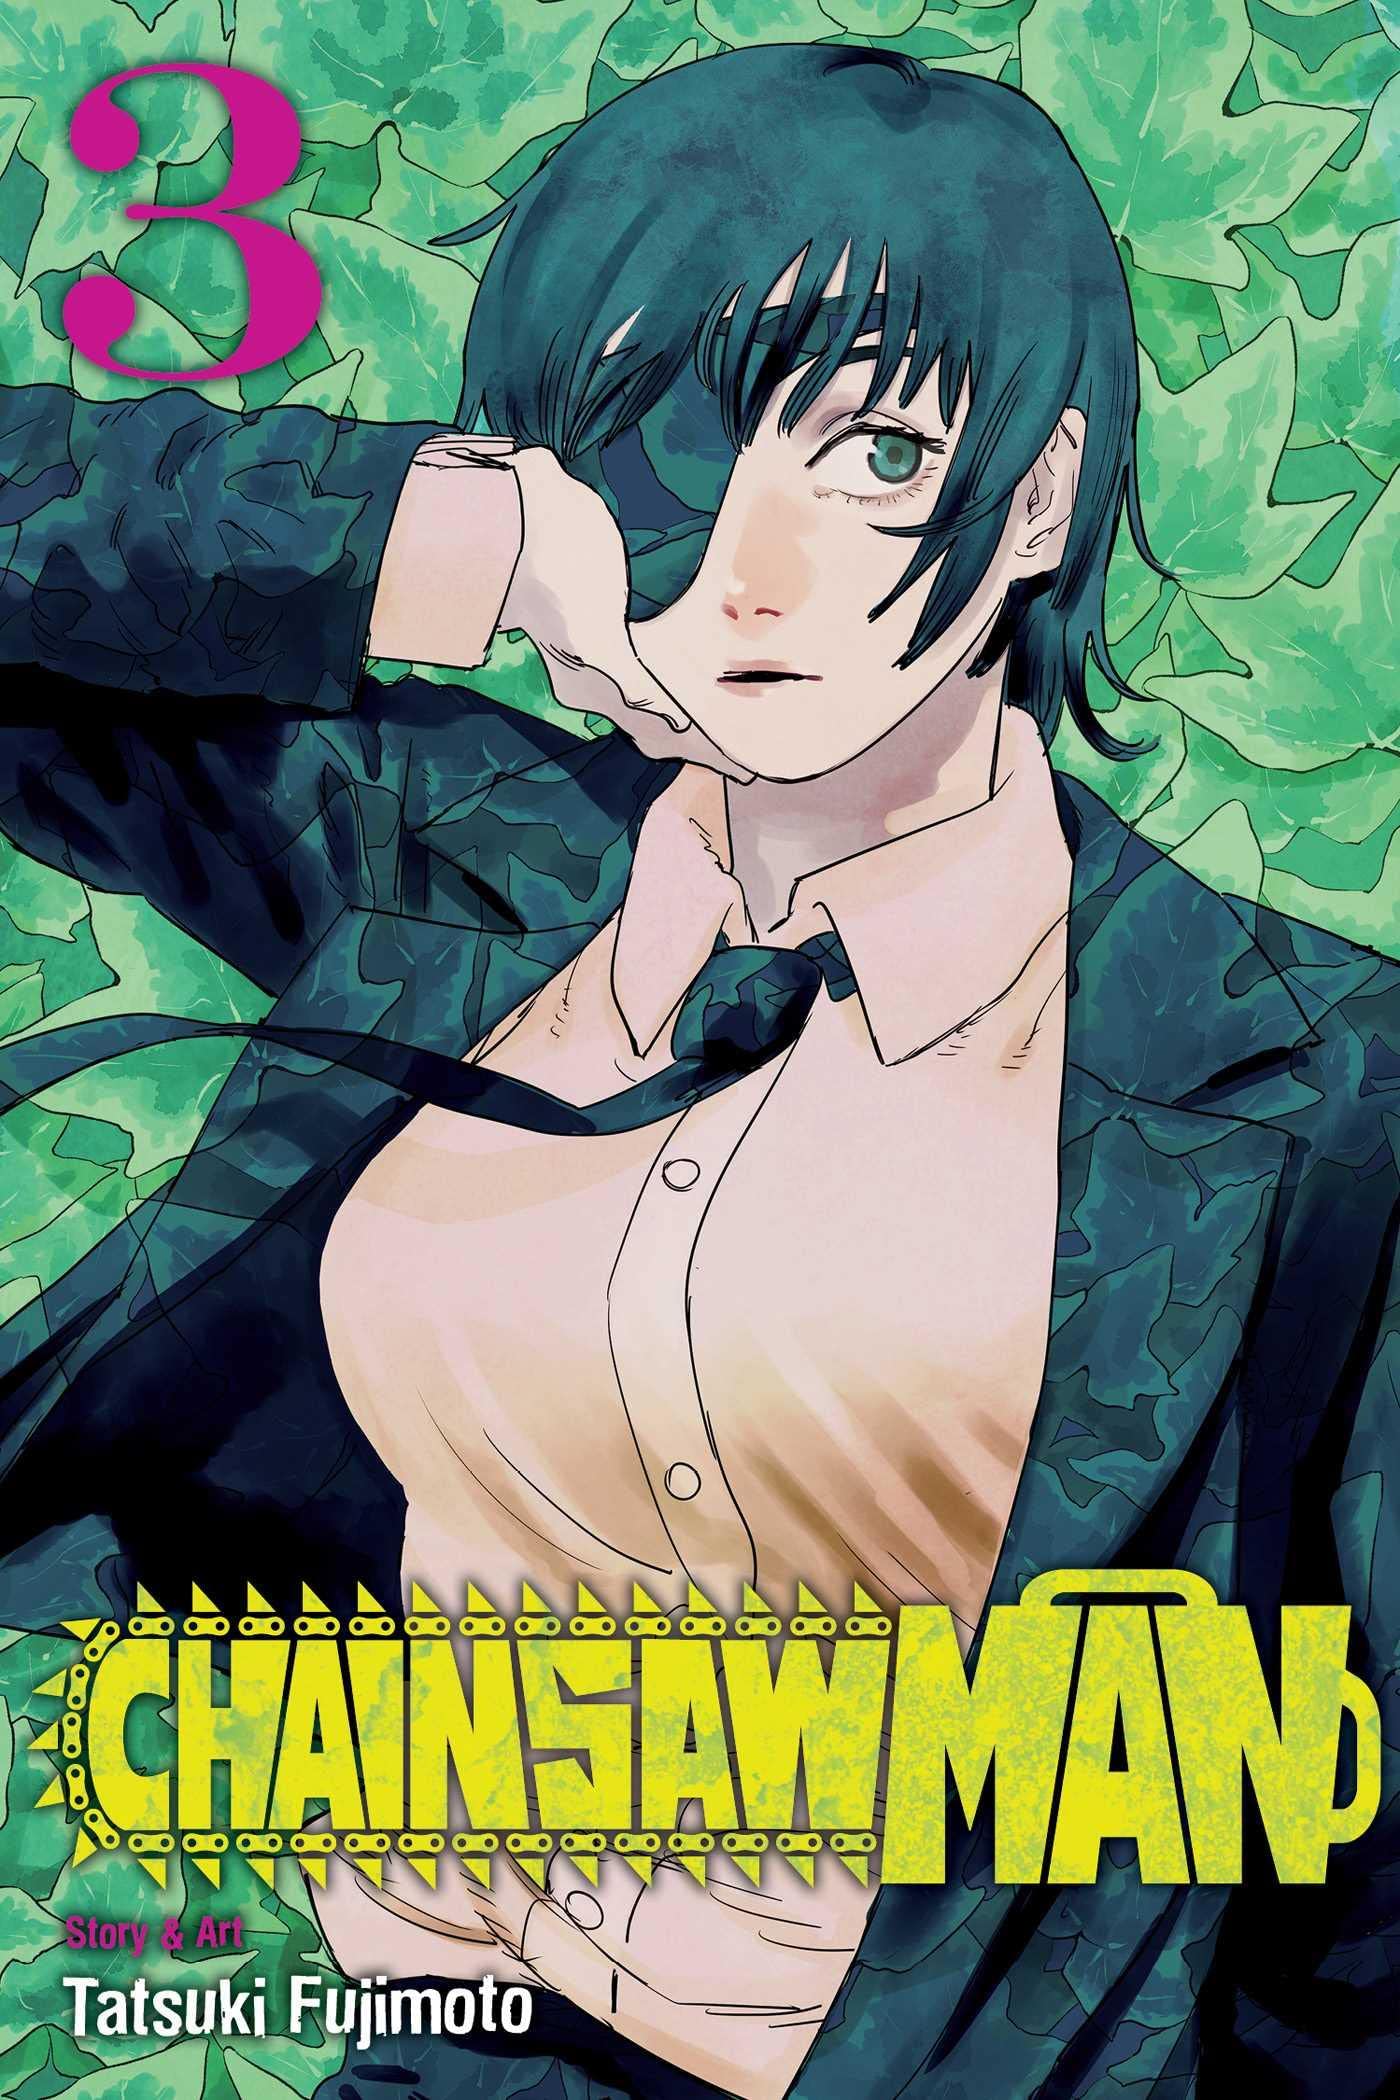 Chainsaw Man Episode 1 Review: That Sounds Awesome | Leisurebyte